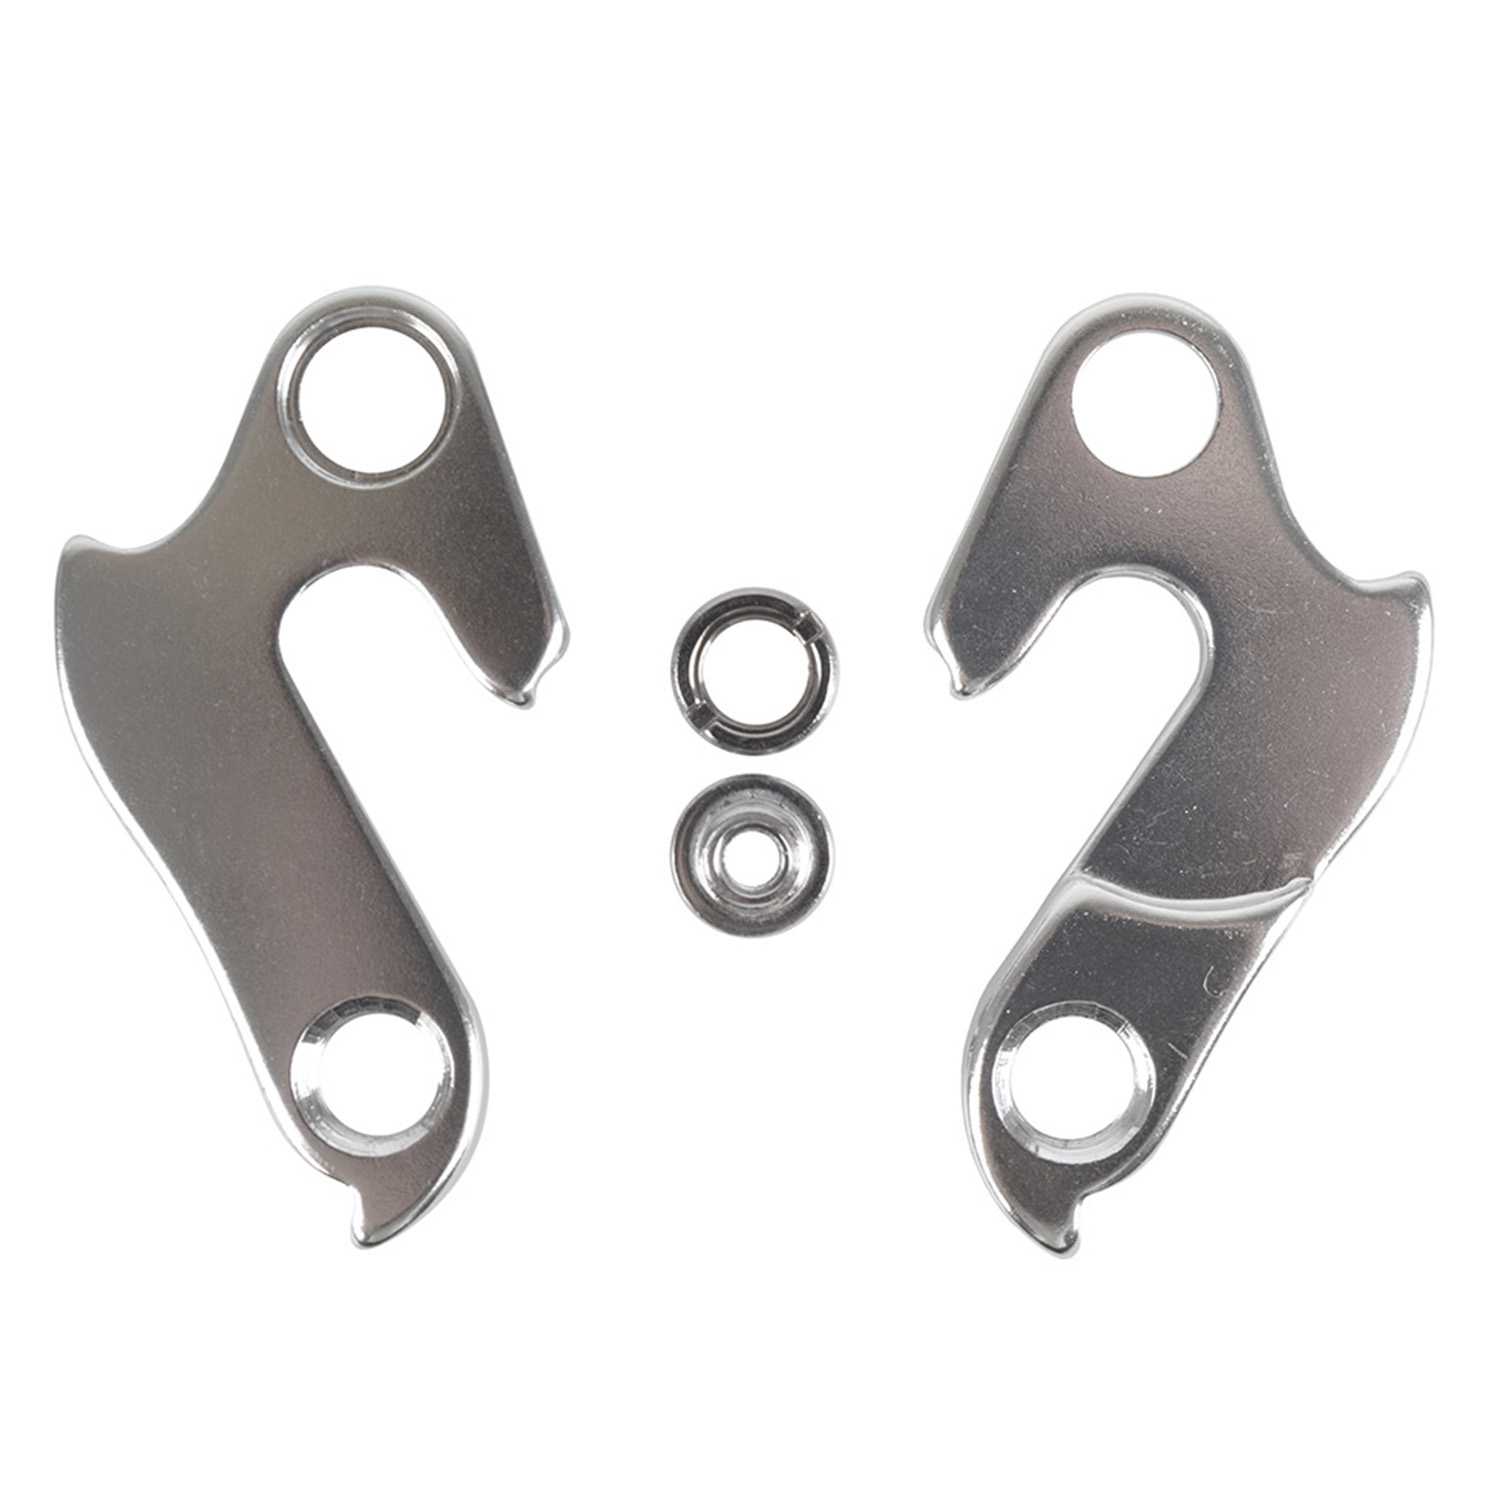 660049 S13 derailleur hanger  – AVAILABLE IN SELECTED BIKE SHOPS